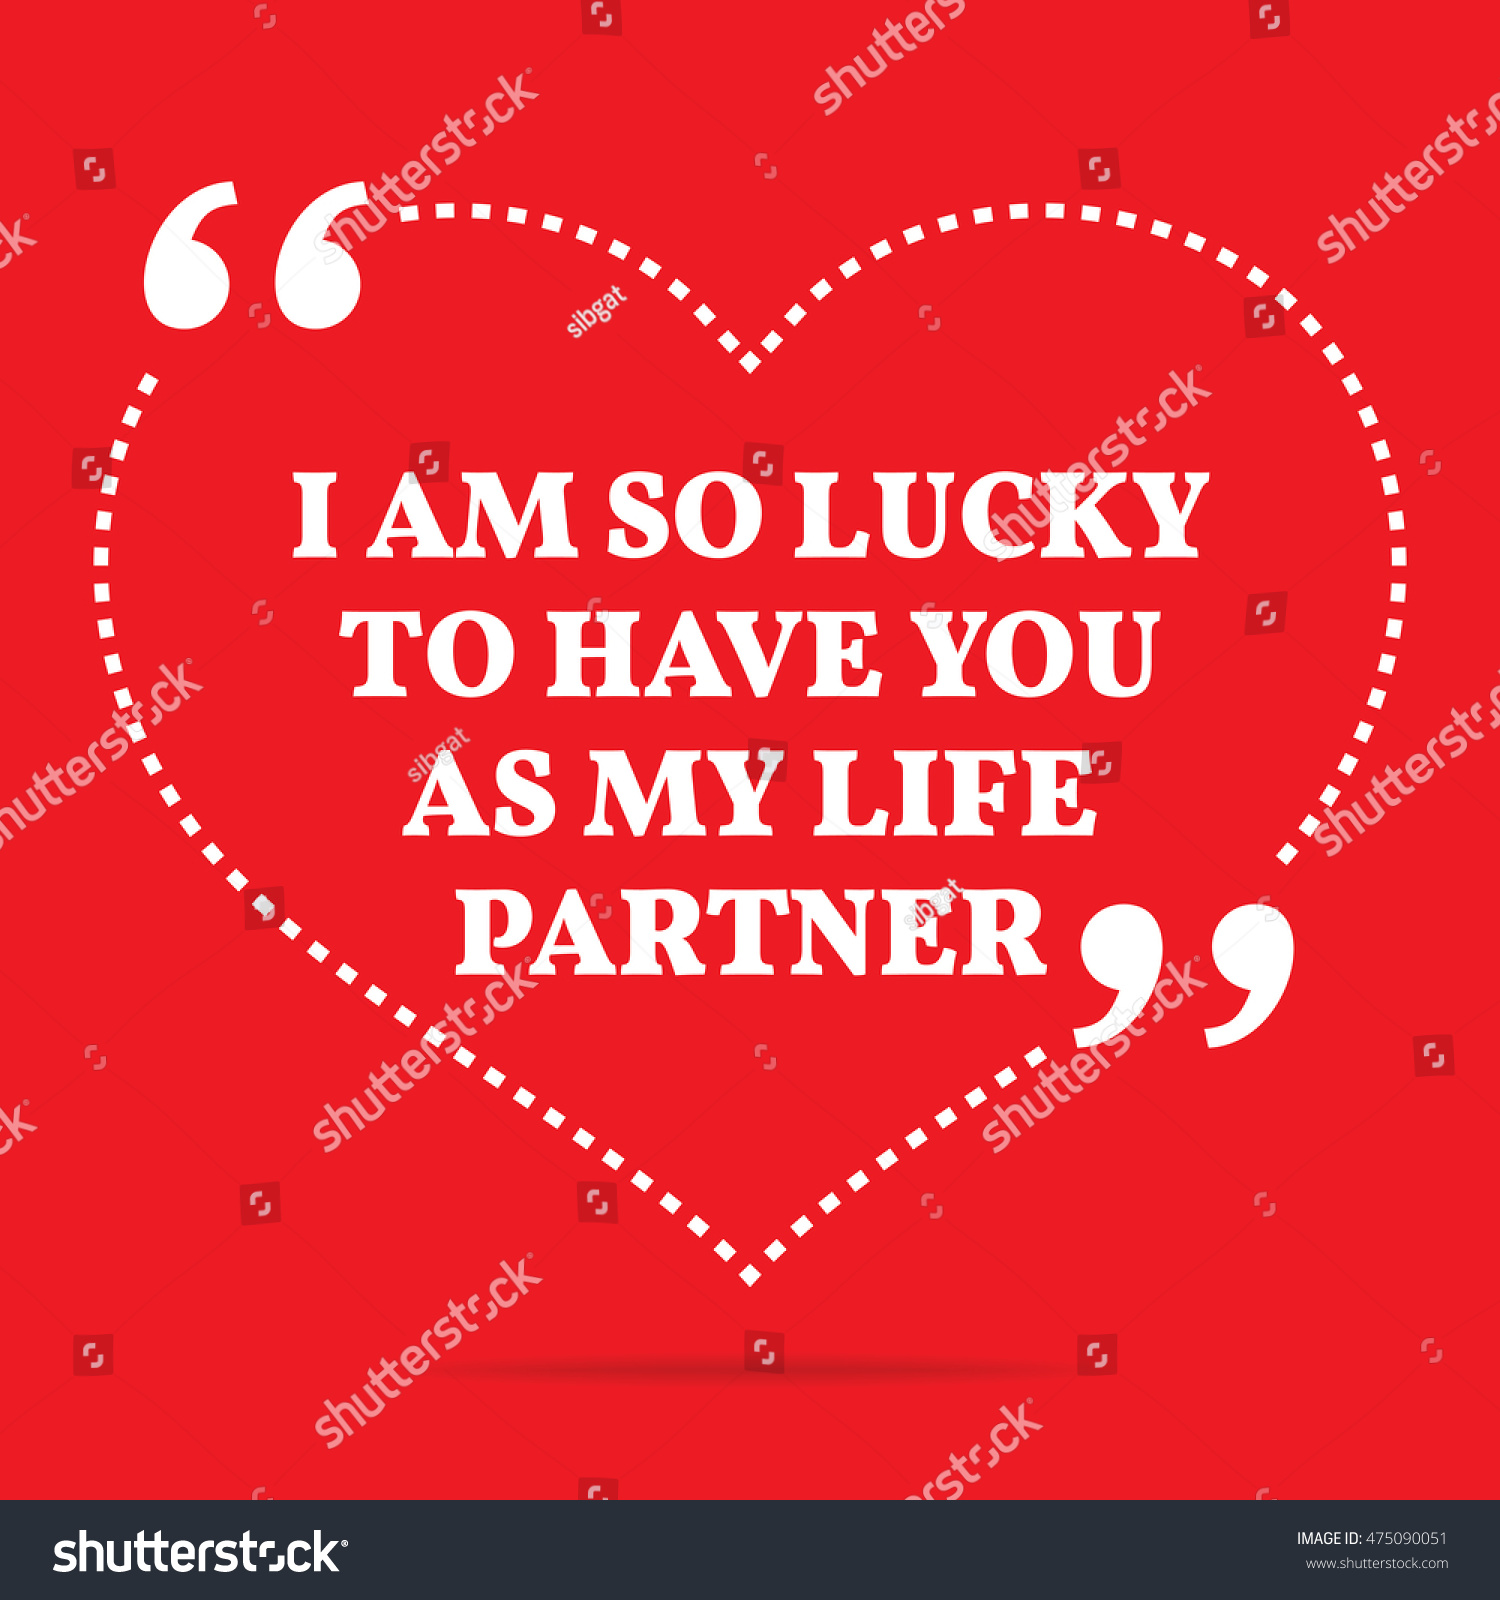 Inspirational love quote I am so lucky to have you as my life partner